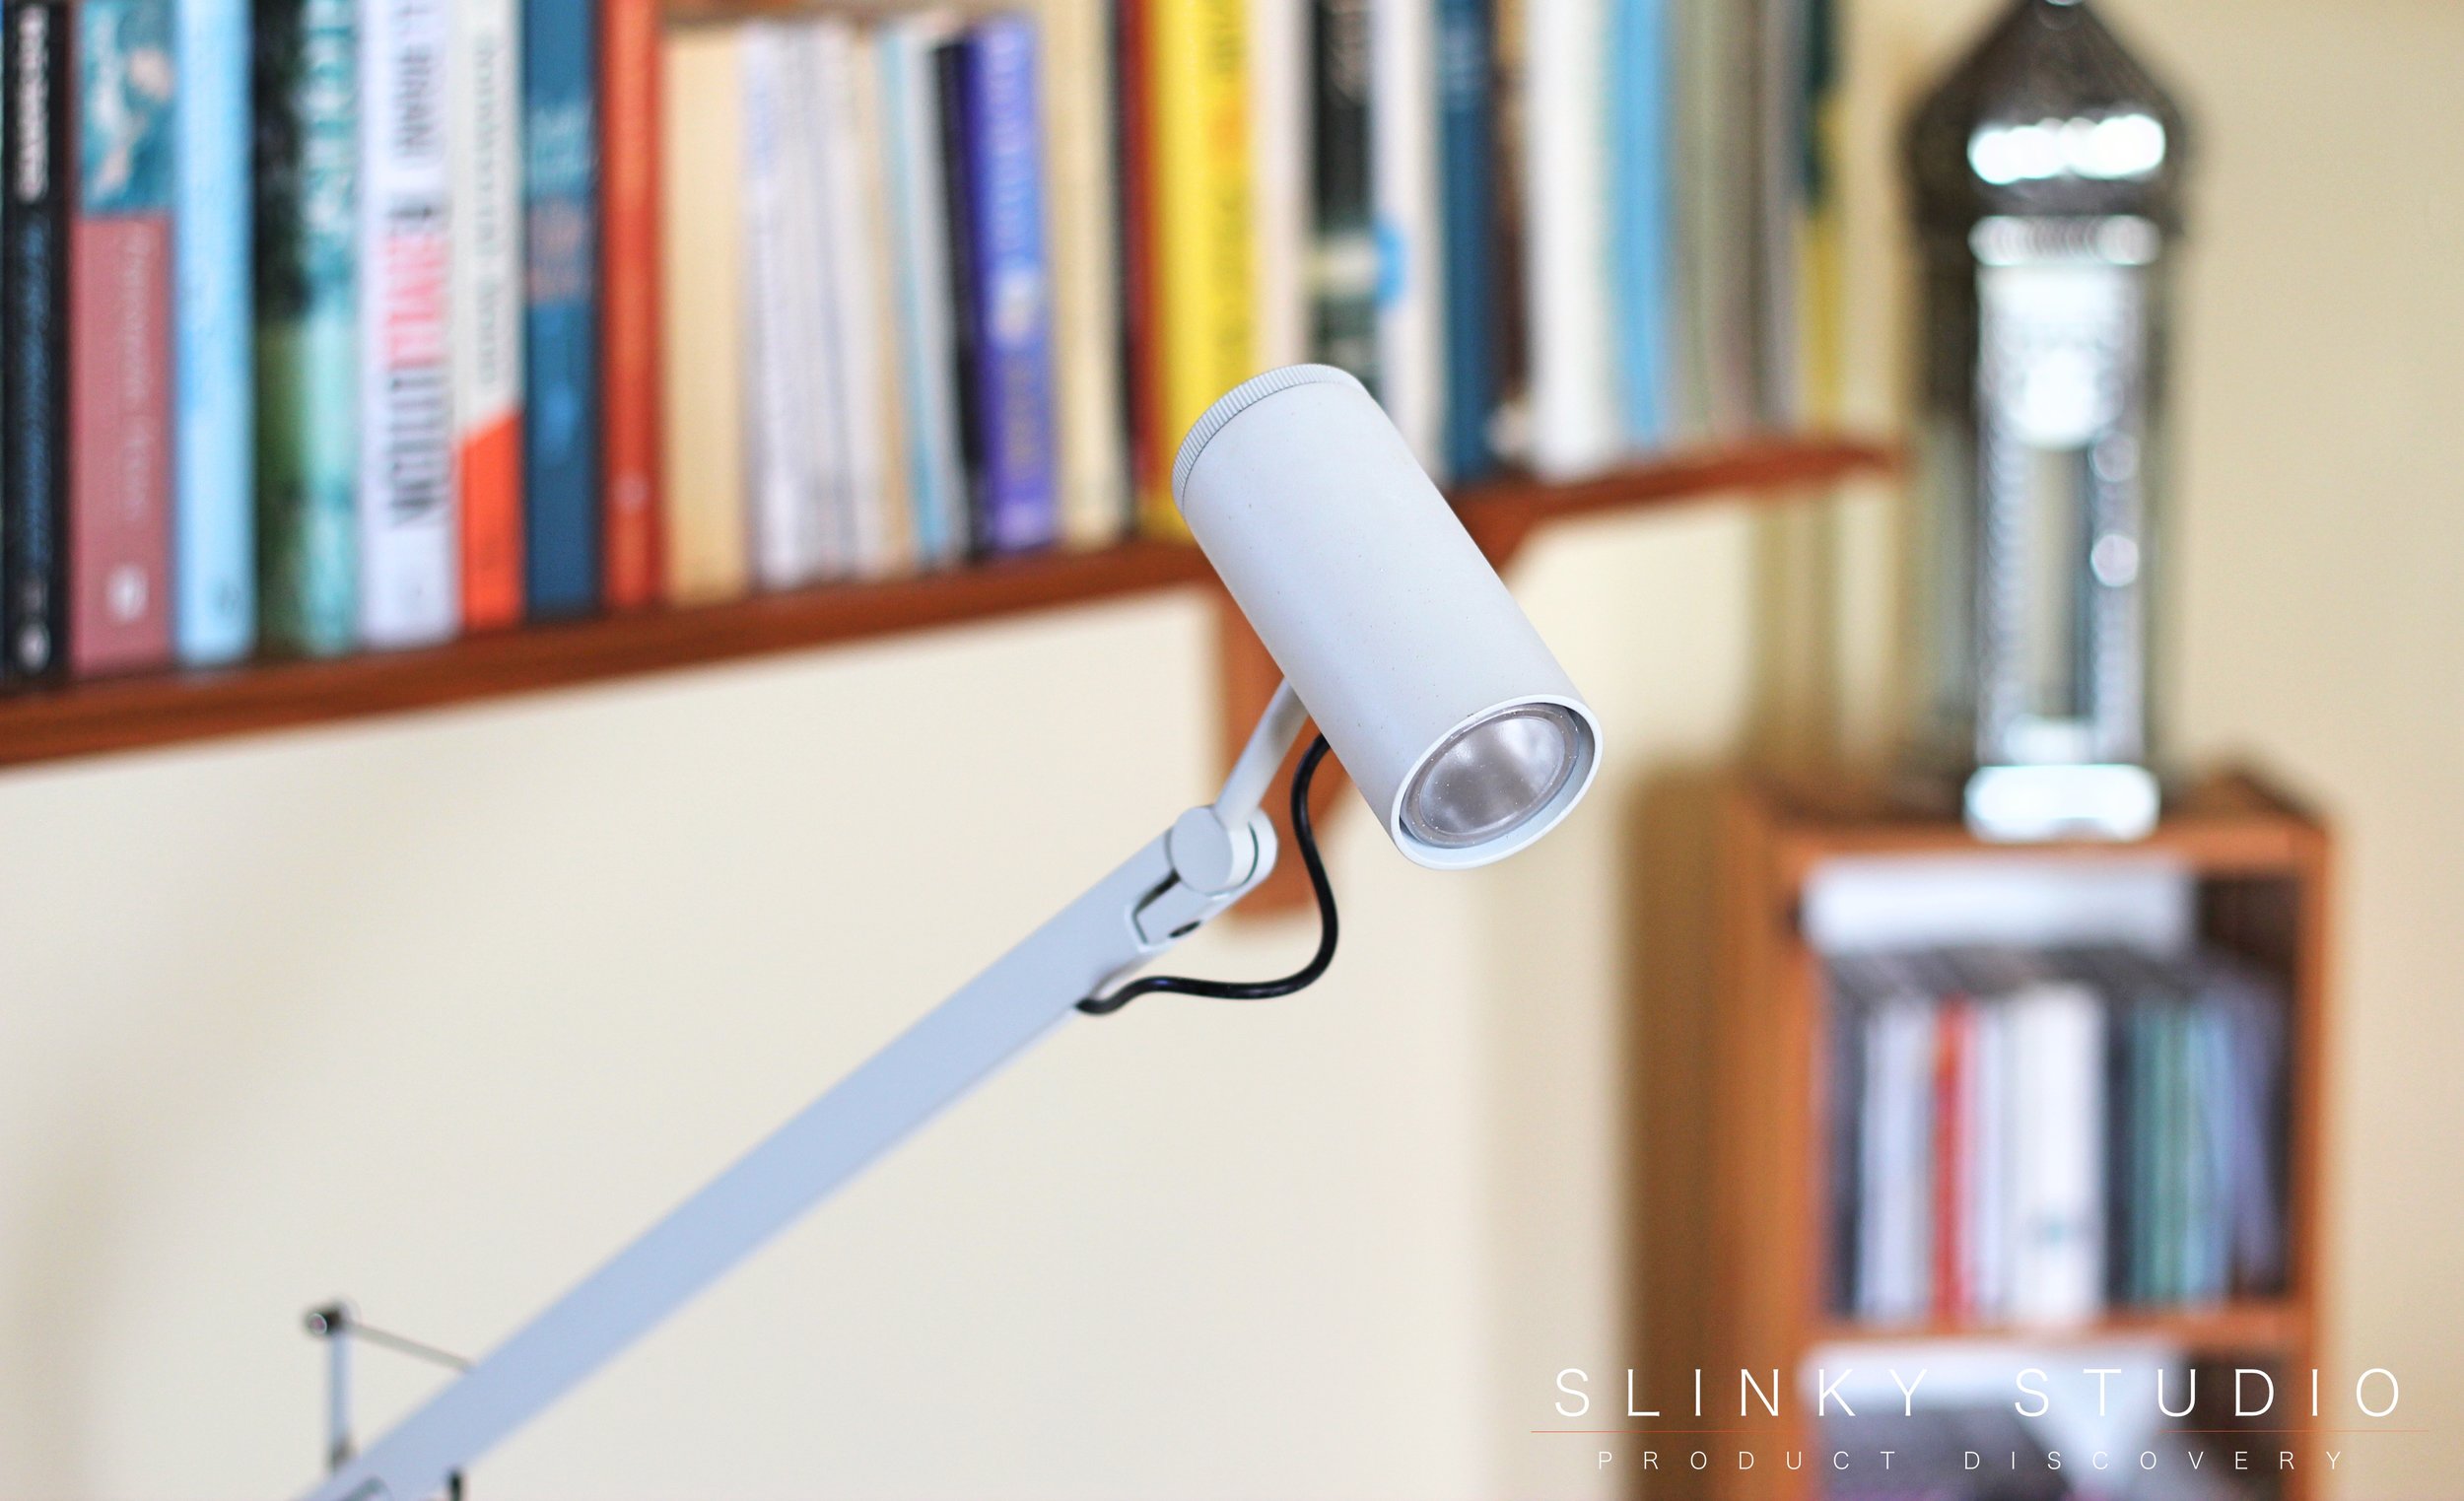 Marset Polo Lamp LED Head Close Up in front of bookshelf.jpg